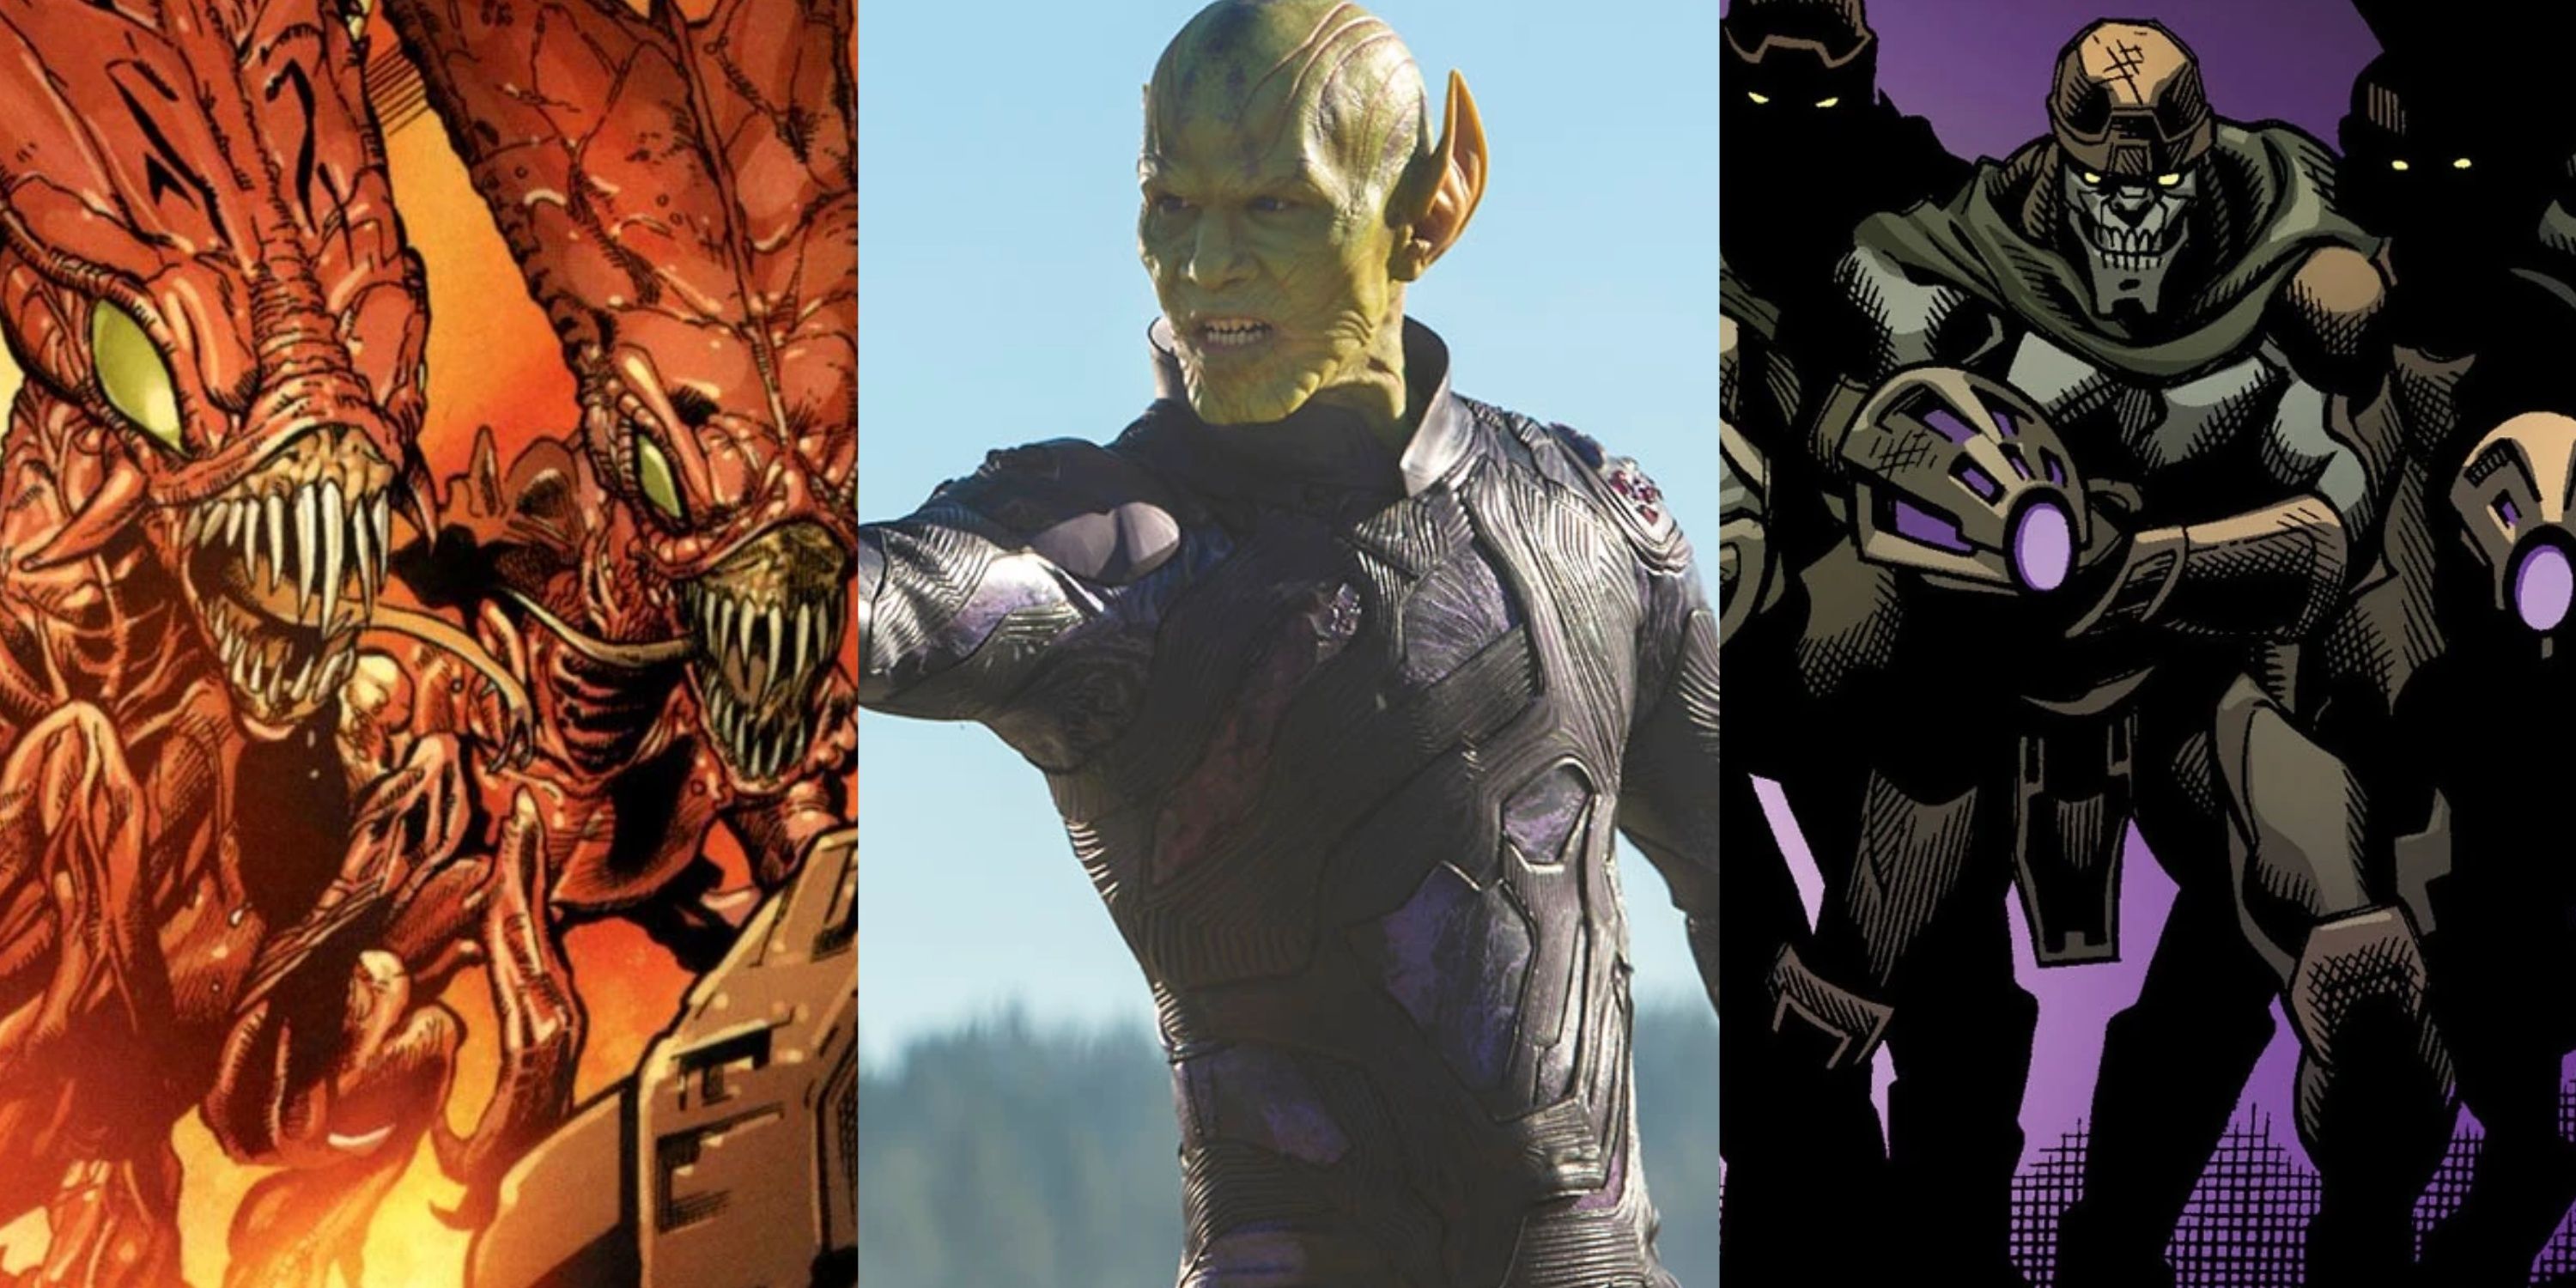 Split image: Brood and Chitauri in Marvel Comics and a Skrull in Captain Marvel movie